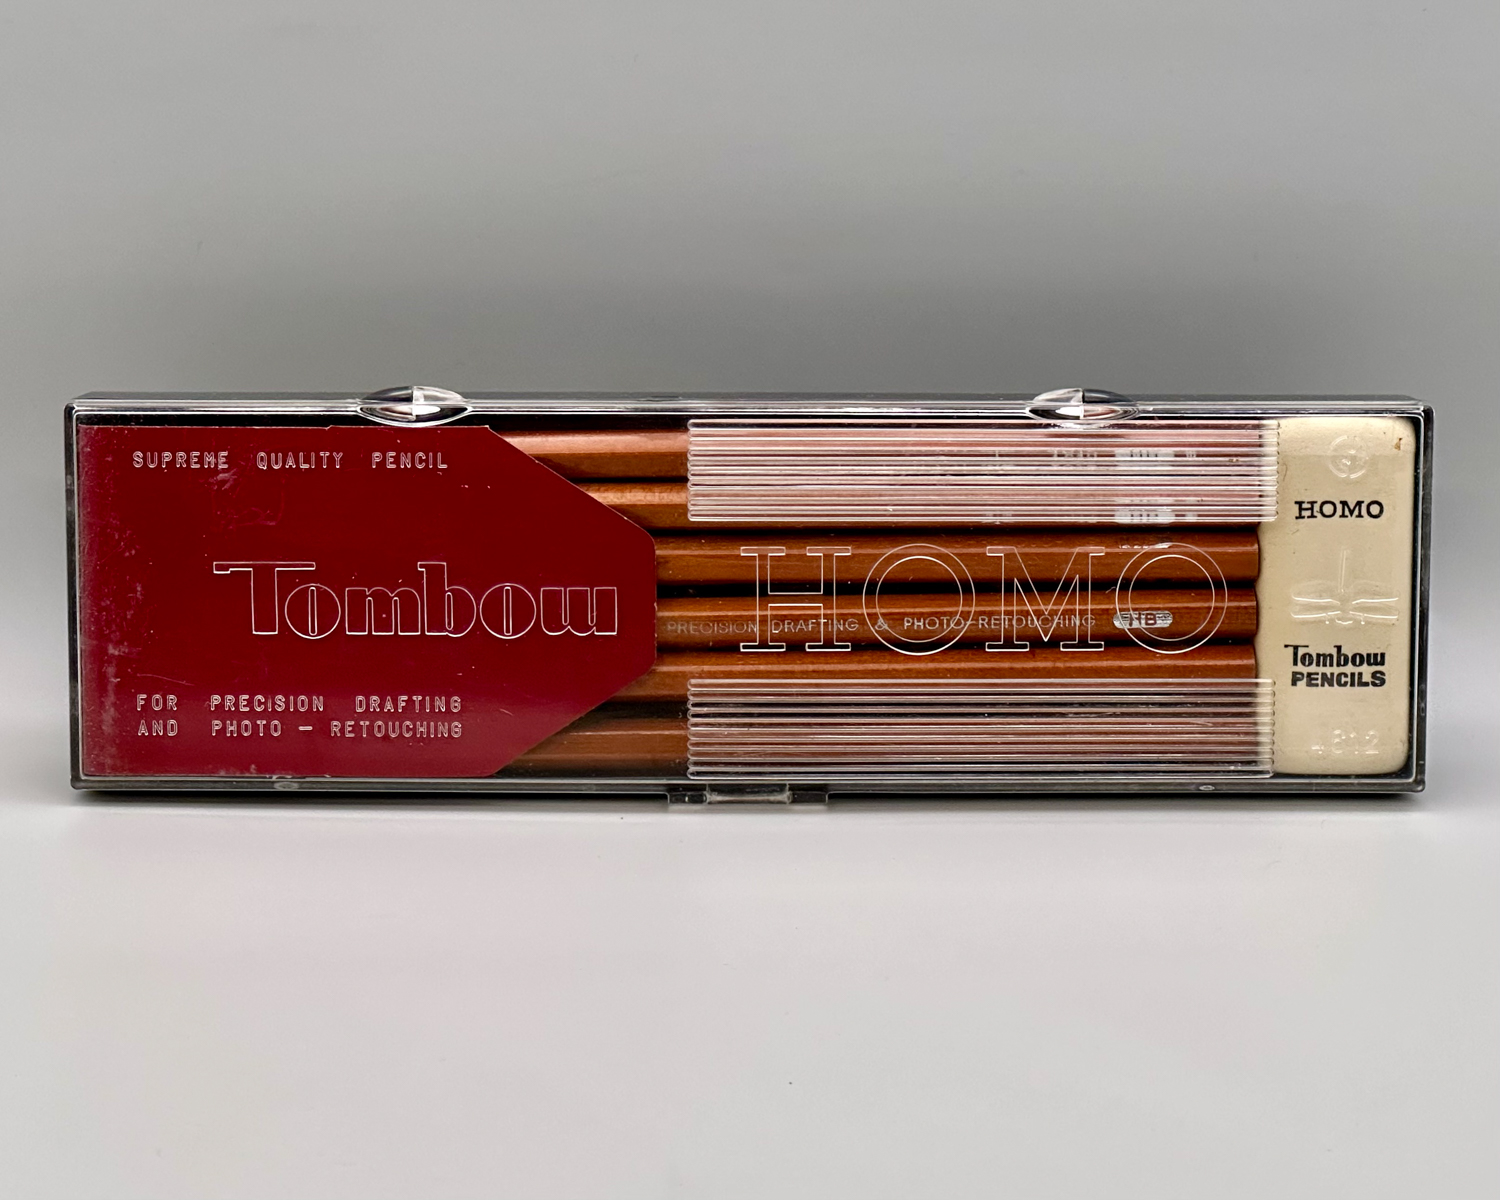 16 VINTAGE PENCILS: TOMBOW PENCIL CO., LTD +BOX - MADE IN JAPAN